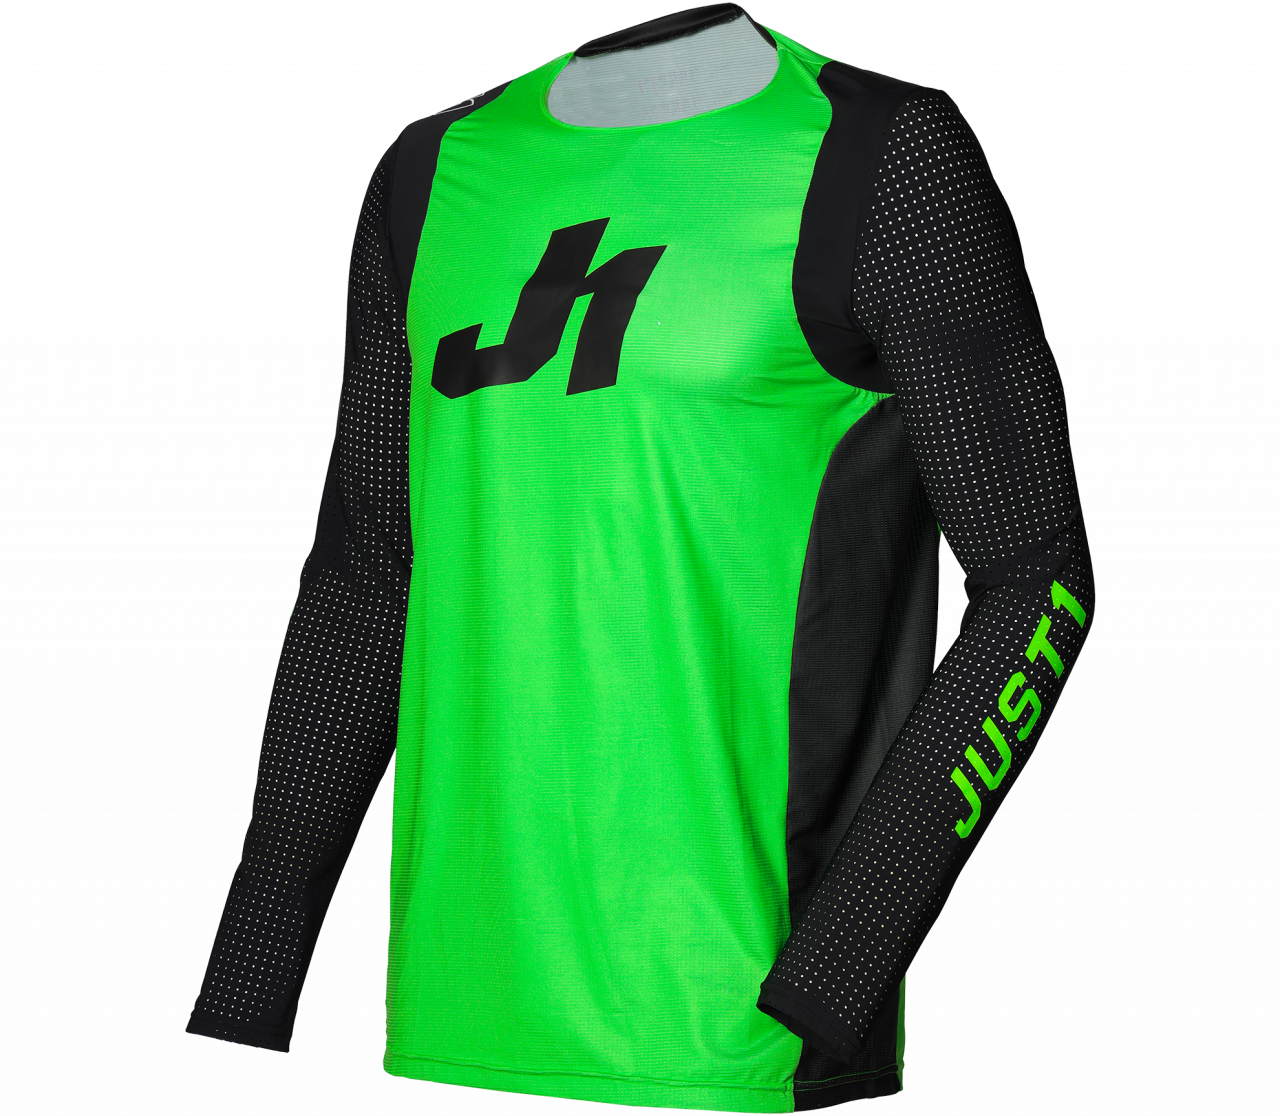 JUST1 JERSEY YOUTH J-FLEX ARIA FLUO GREEN - BLACK